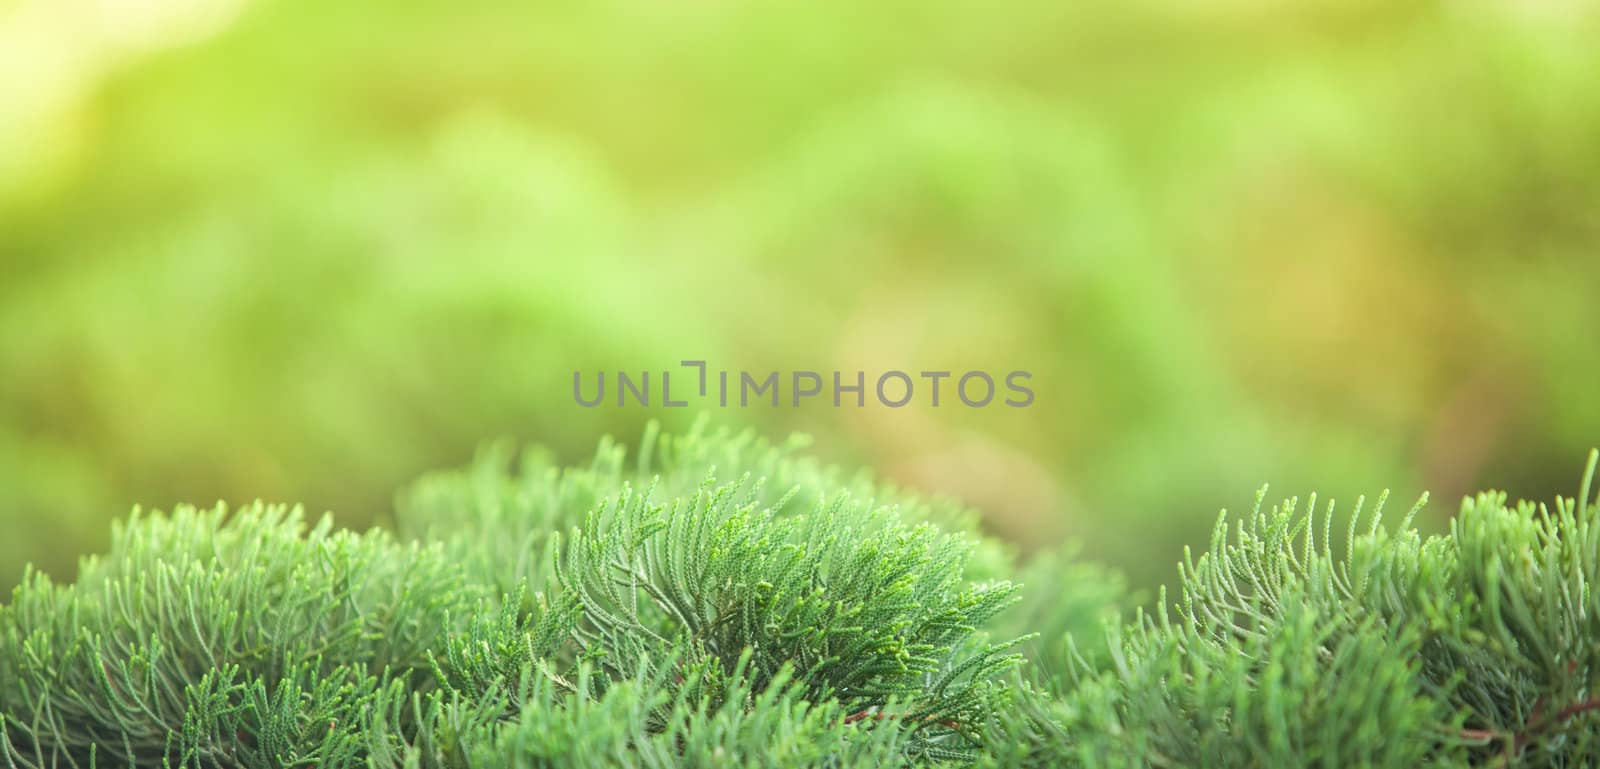 Green leave background by Suriyaphoto